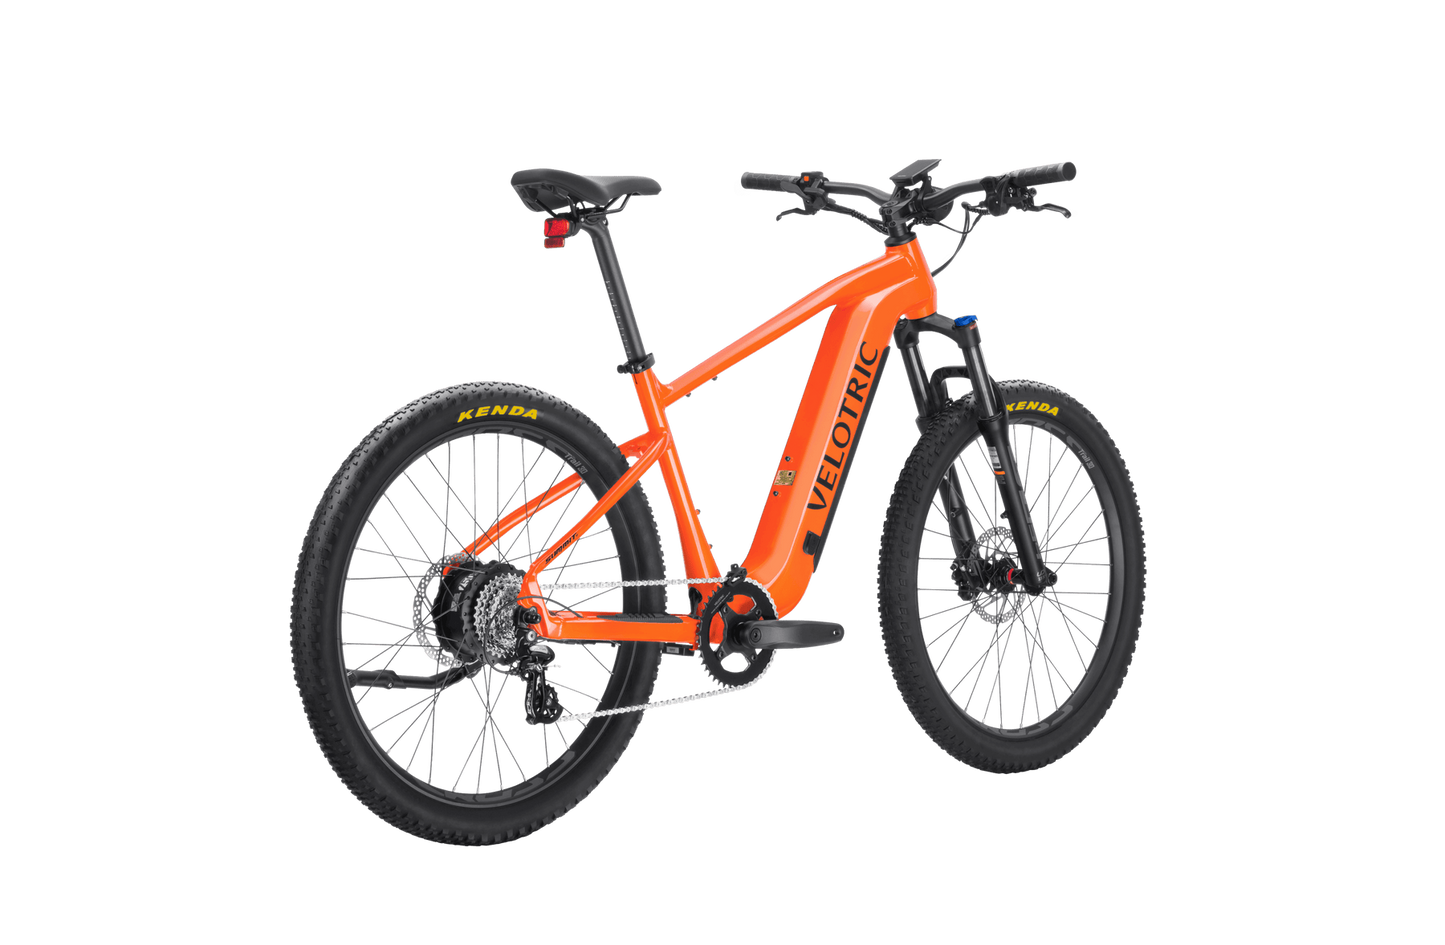 Orange Velotric Summit 1 electric mountain bike with pedal assist and black accents, shown on a black background.